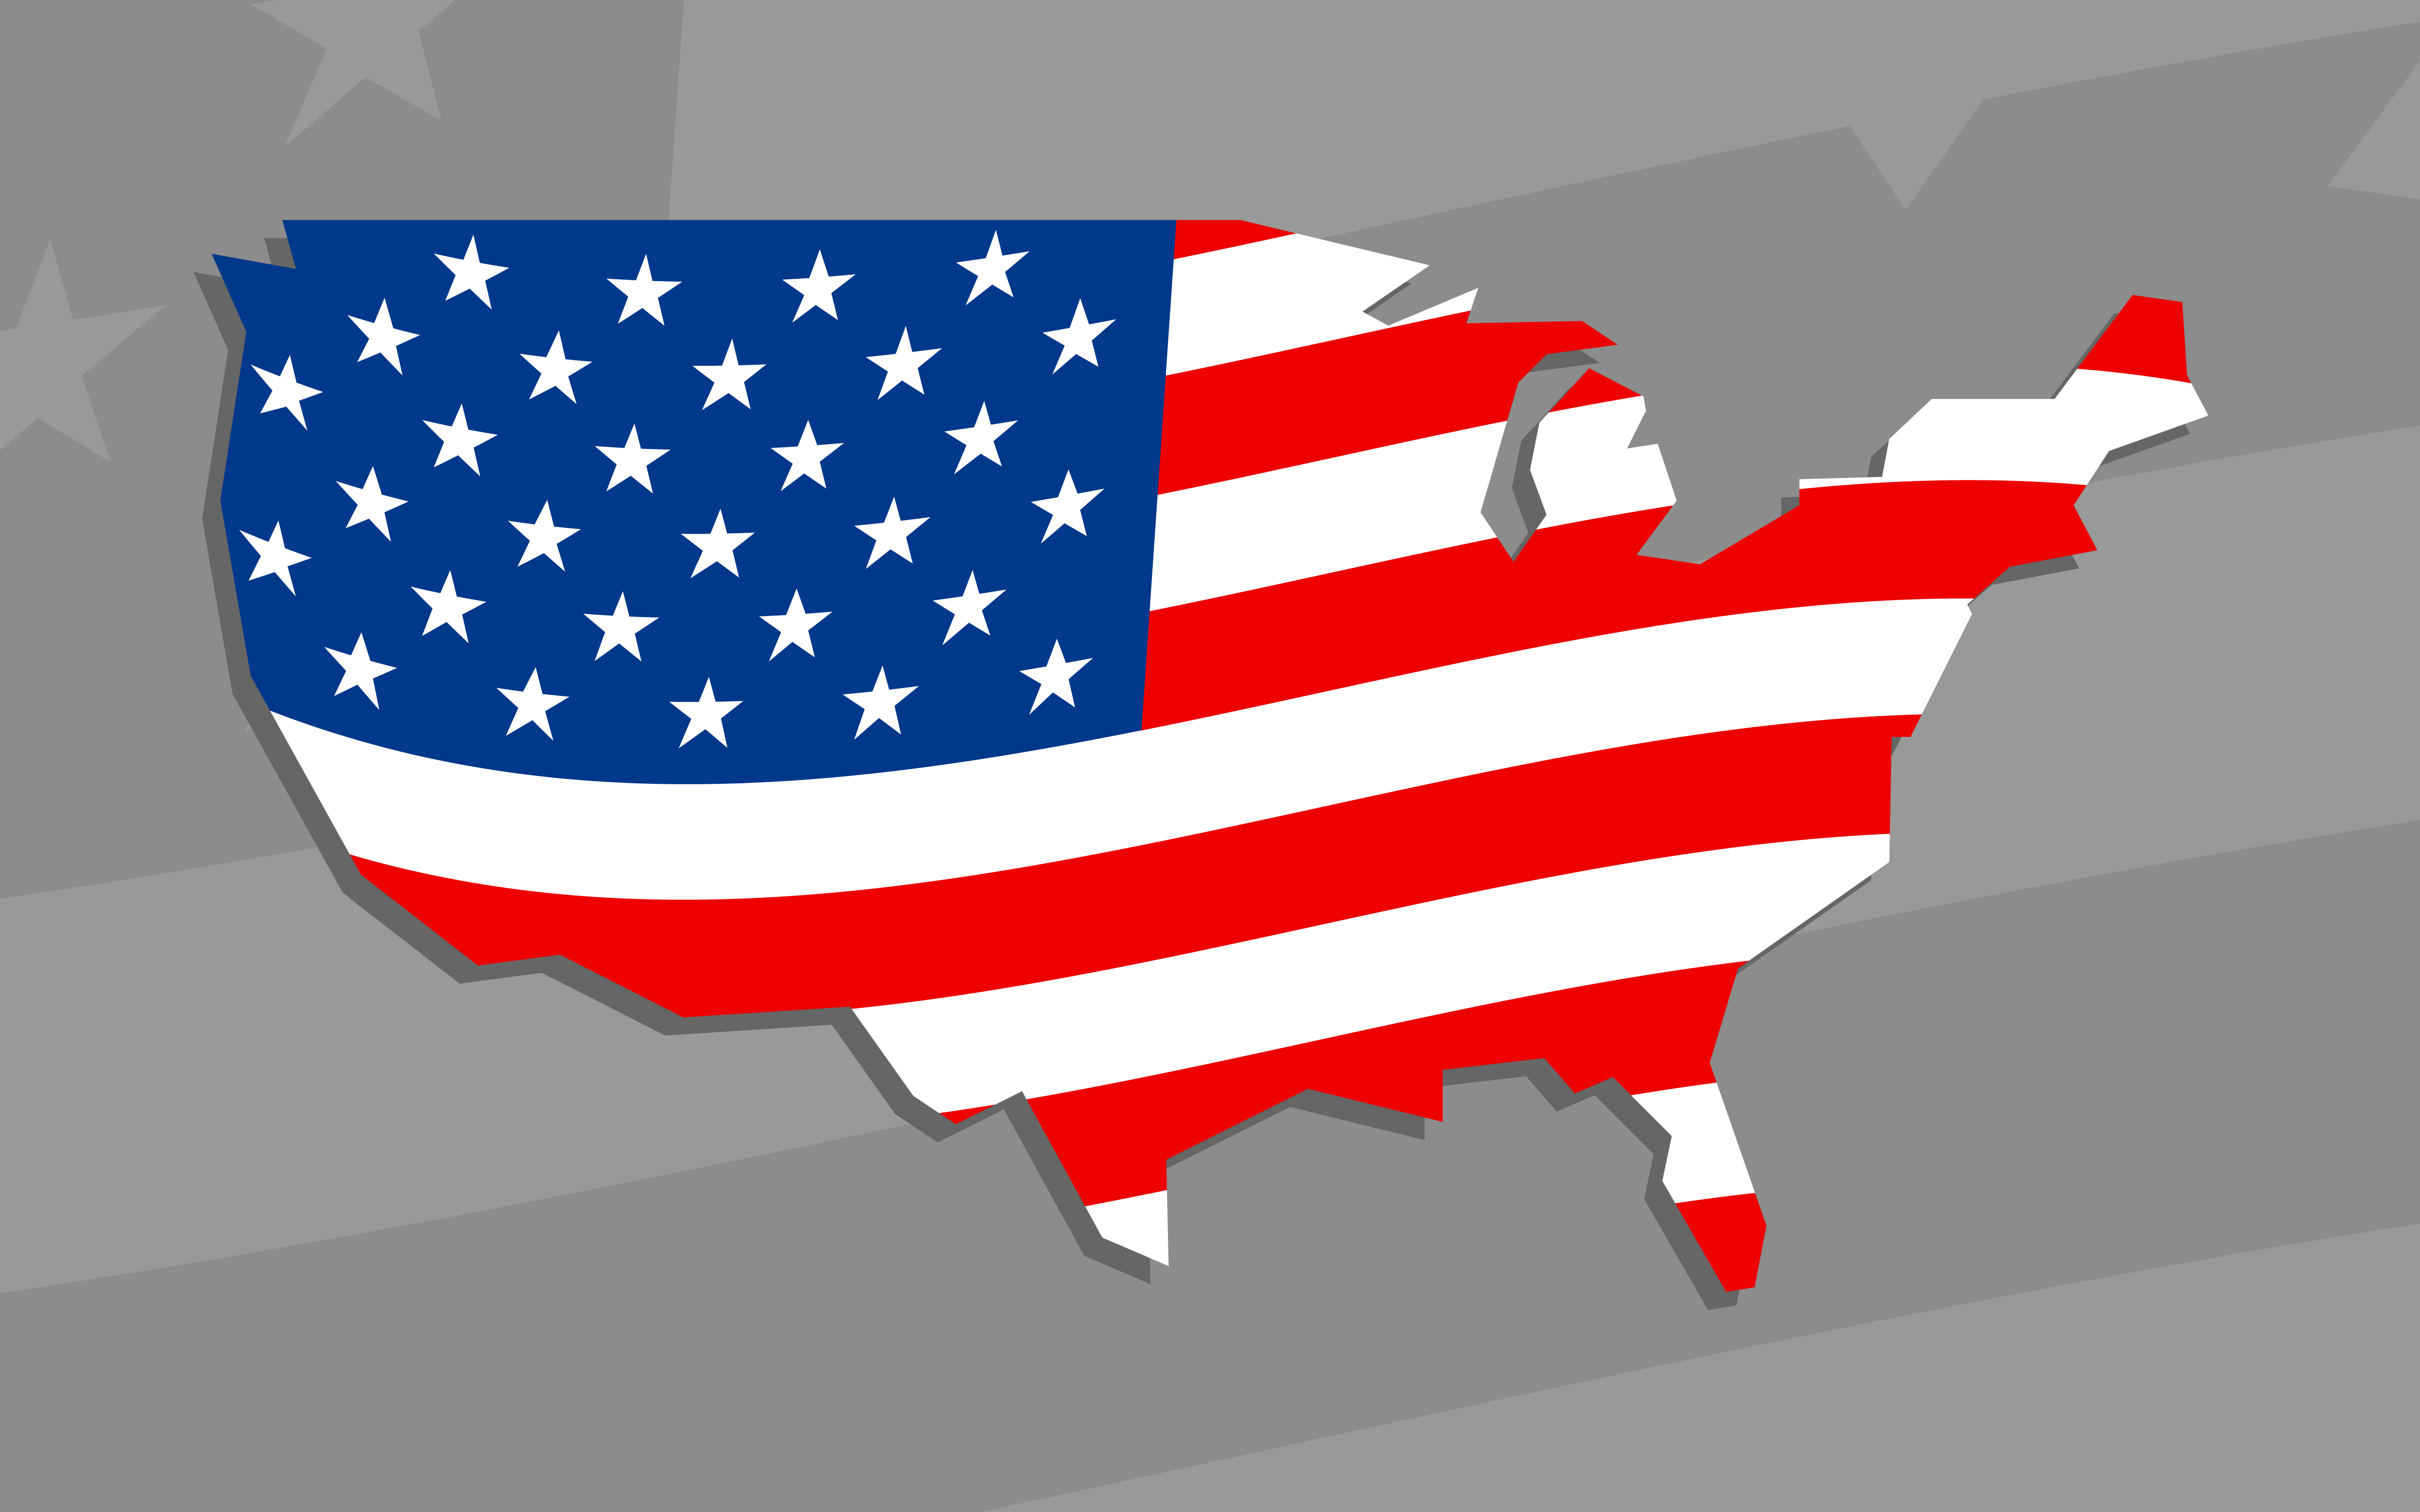 Download America country flag vector icon - Download Free Vectors ...